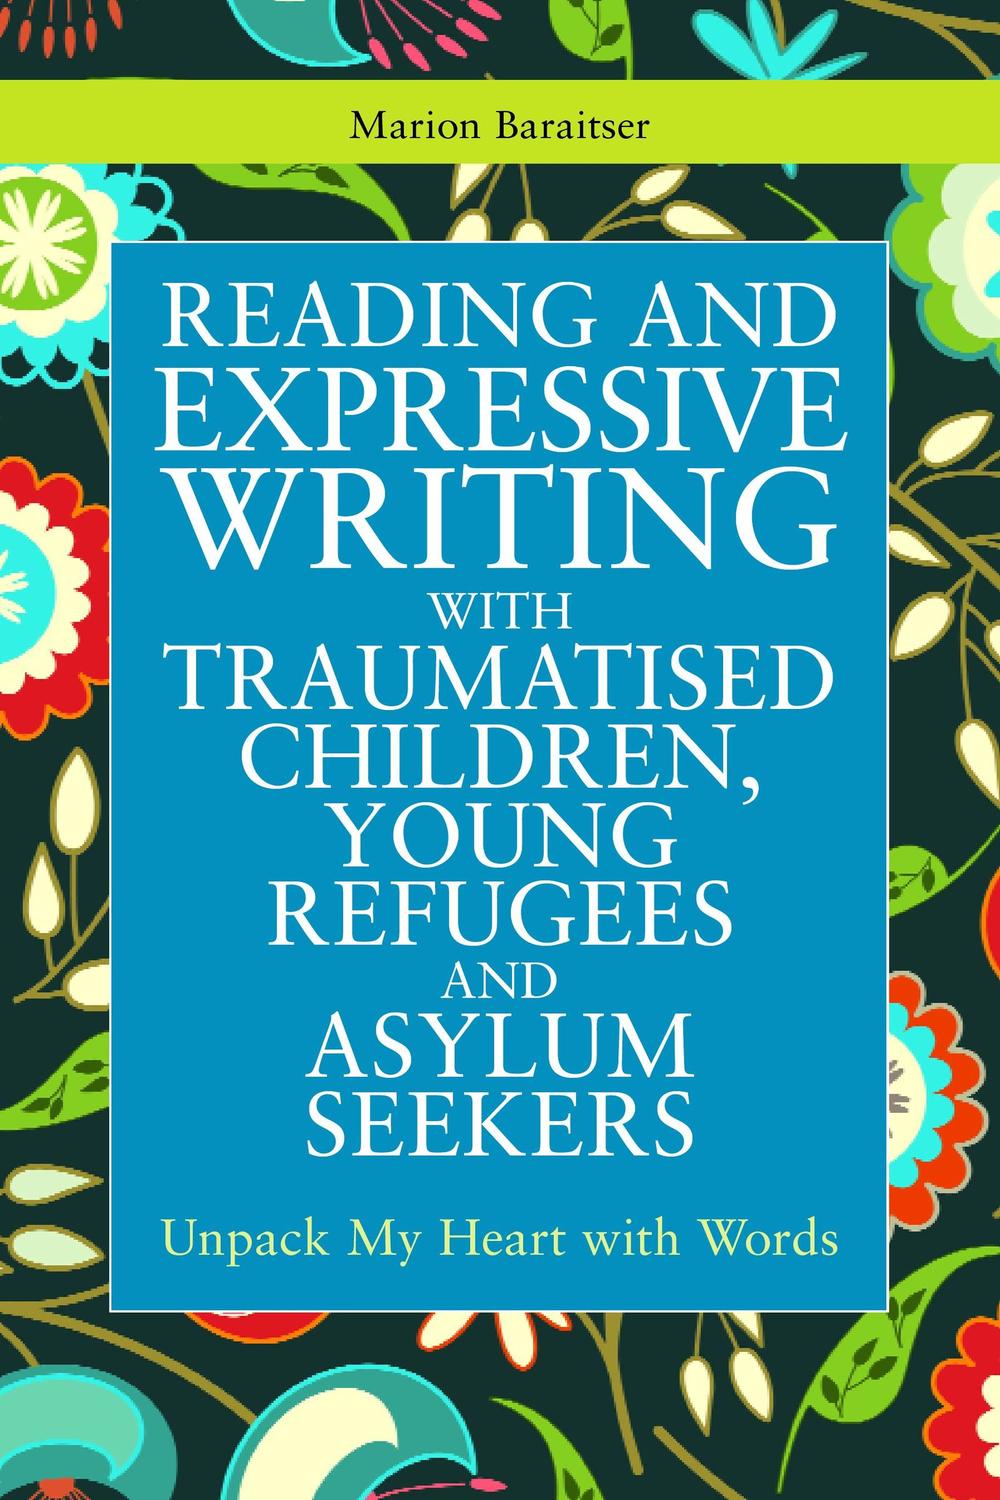 Reading and Expressive Writing with Traumatised Children, Young Refugees and Asylum Seekers - Marion Baraitser